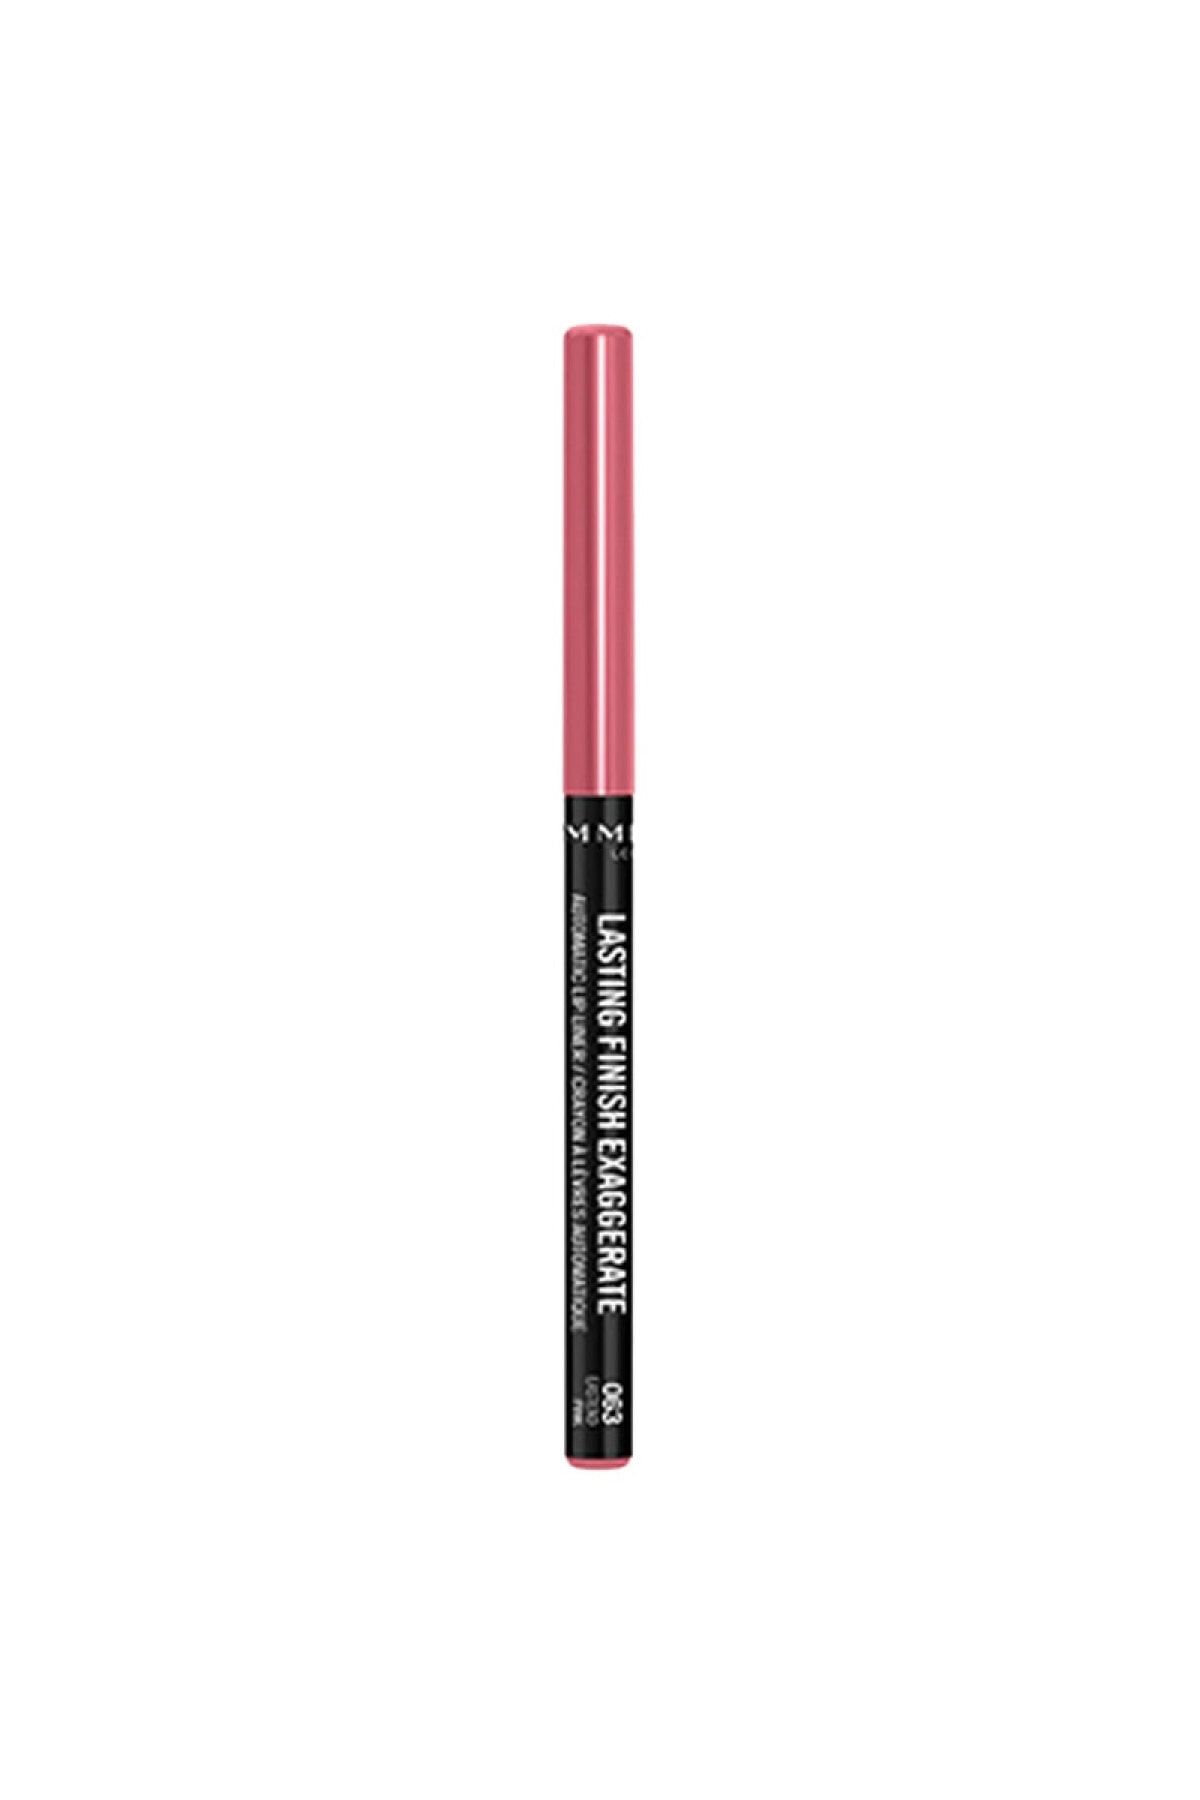 Rimmel London Lasting Finish Exaggerate Automatic Lip Liner 063 Eastend Pink